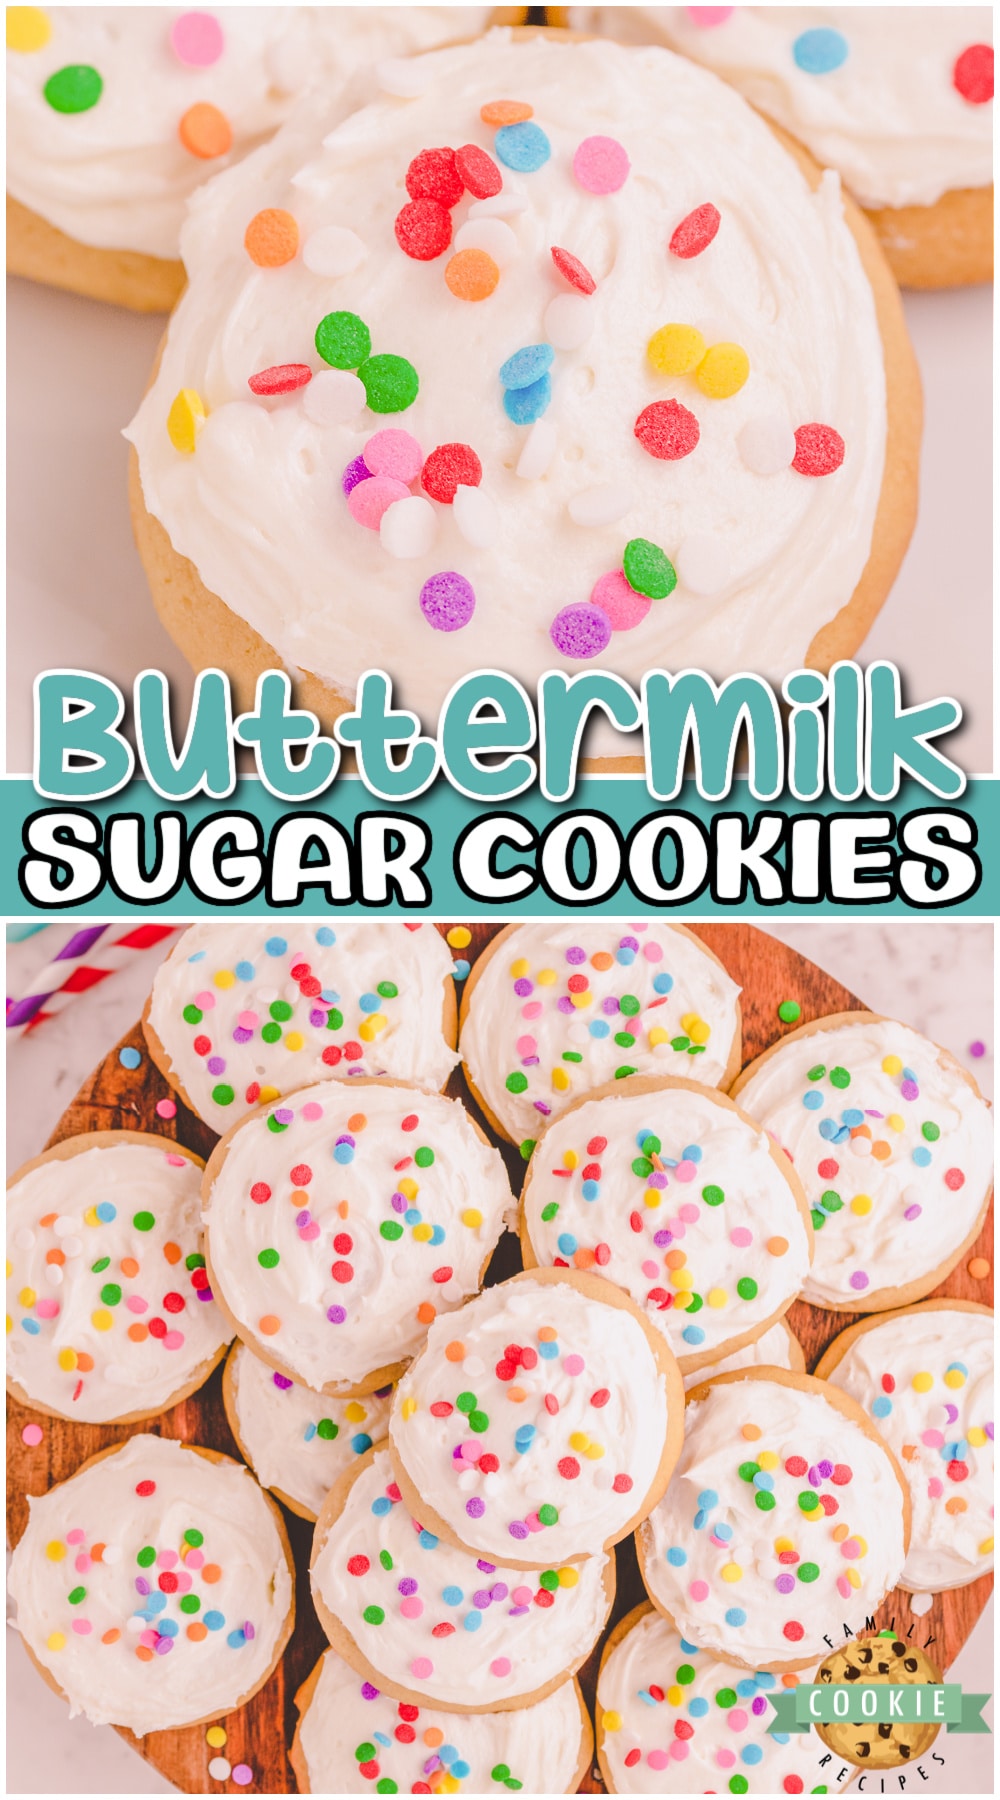 Buttermilk Sugar Cookies are soft, pillowy cookies with a fantastic vanilla buttercream. This sugar cookie with buttermilk recipe is a tried & true family favorite you'll want to keep! via @buttergirls